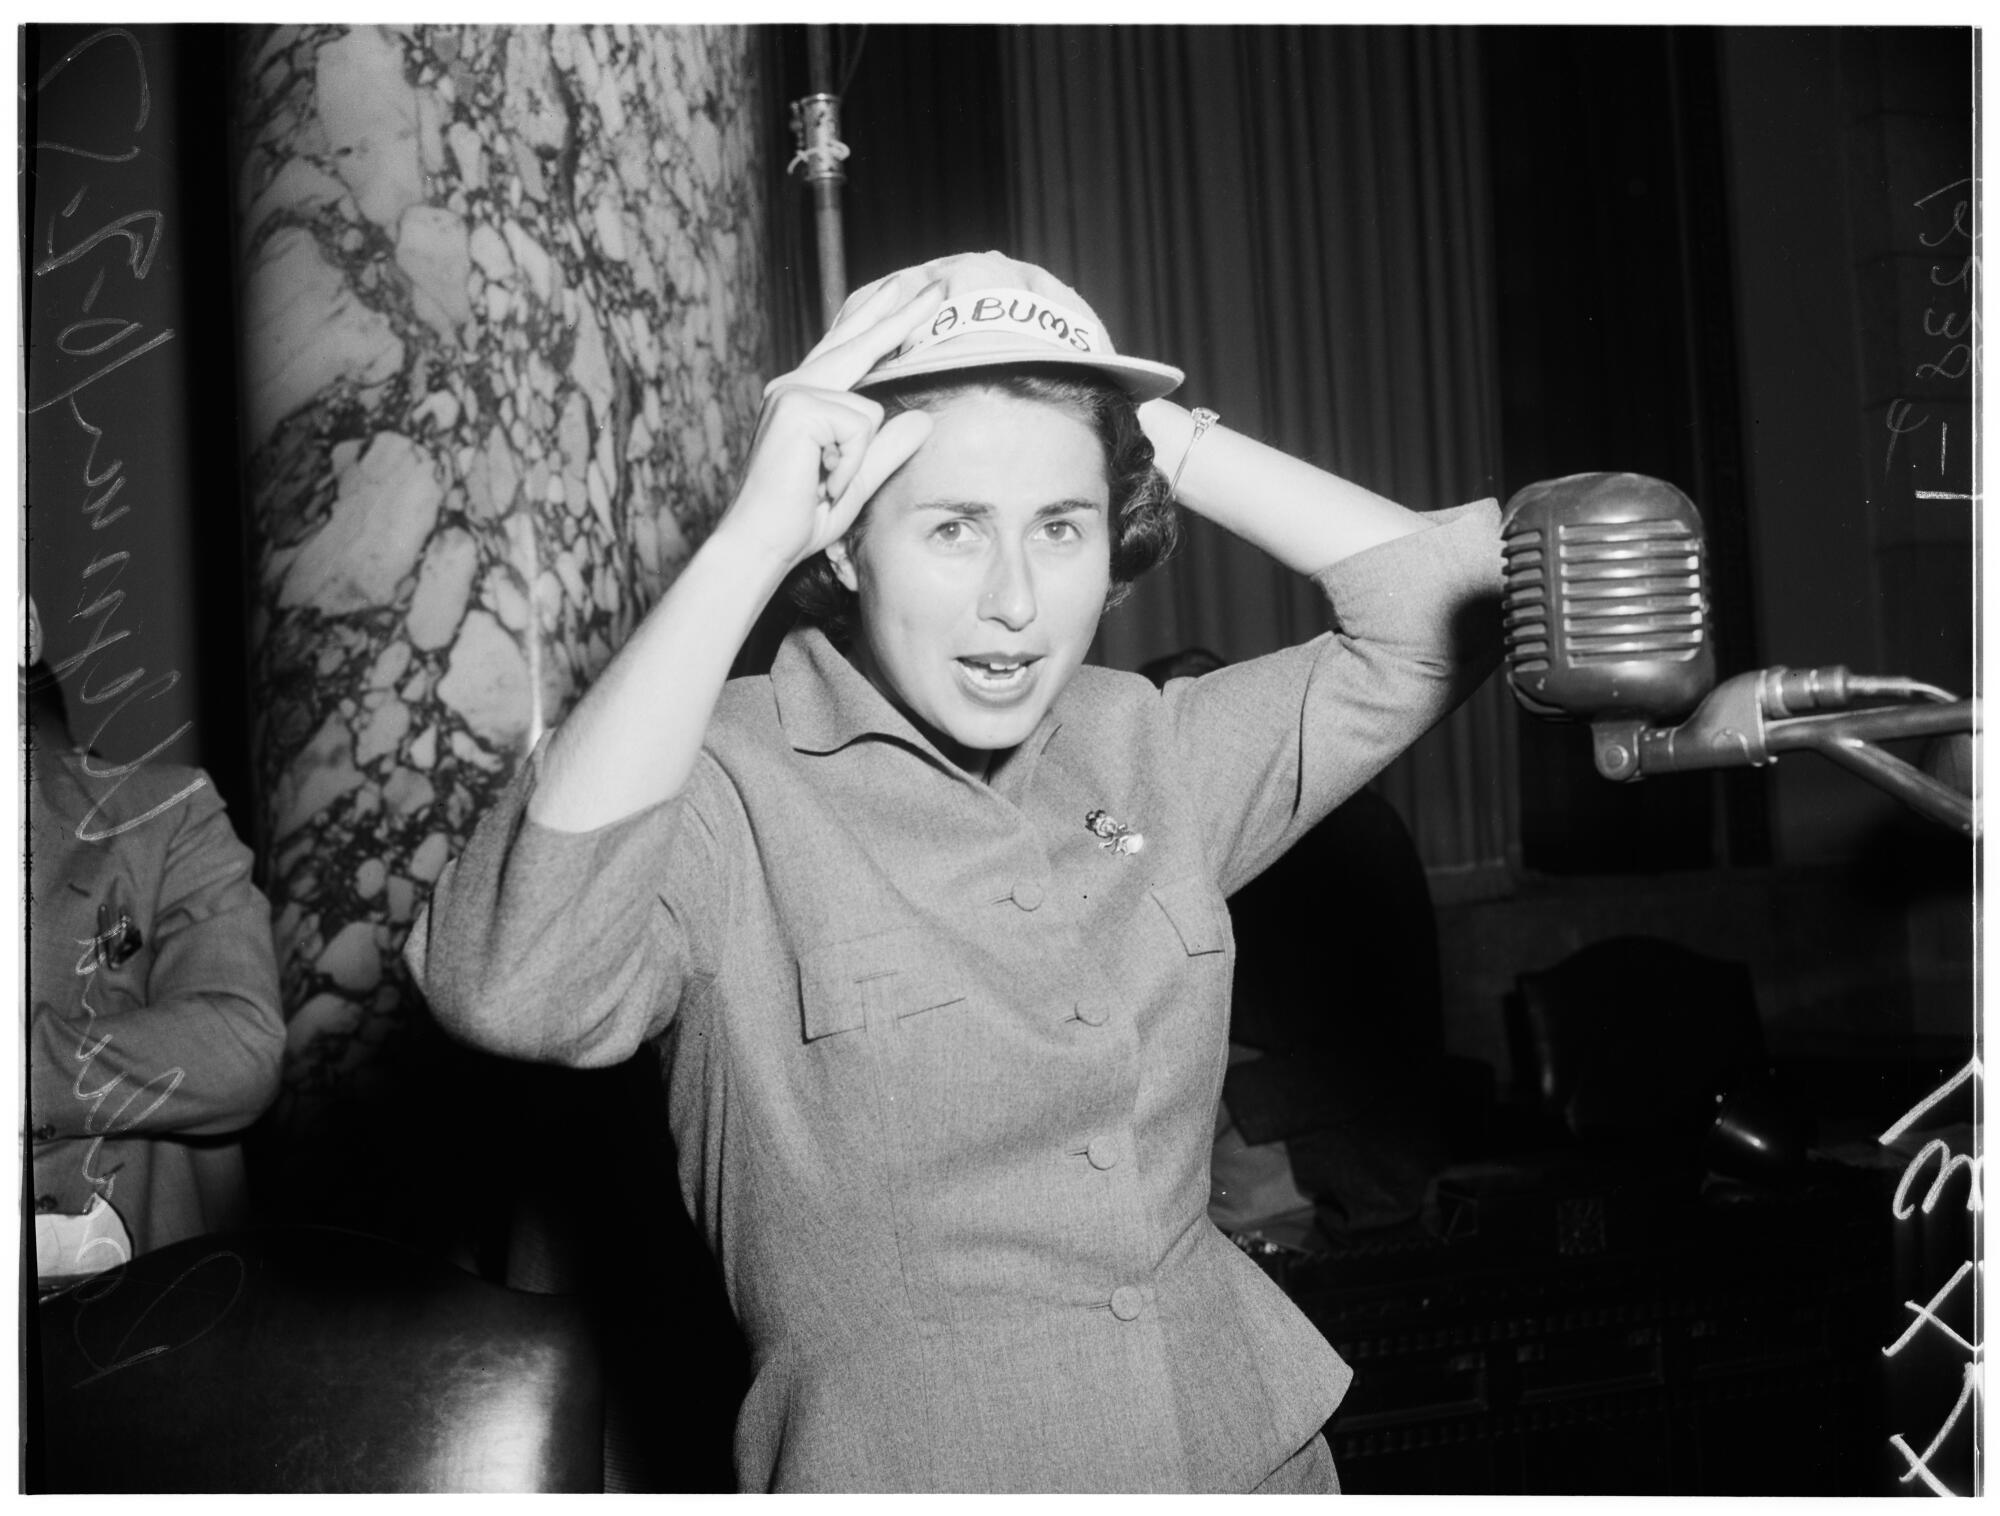 Rosalind Wyman wearing a baseball hat with "Bums" on it.